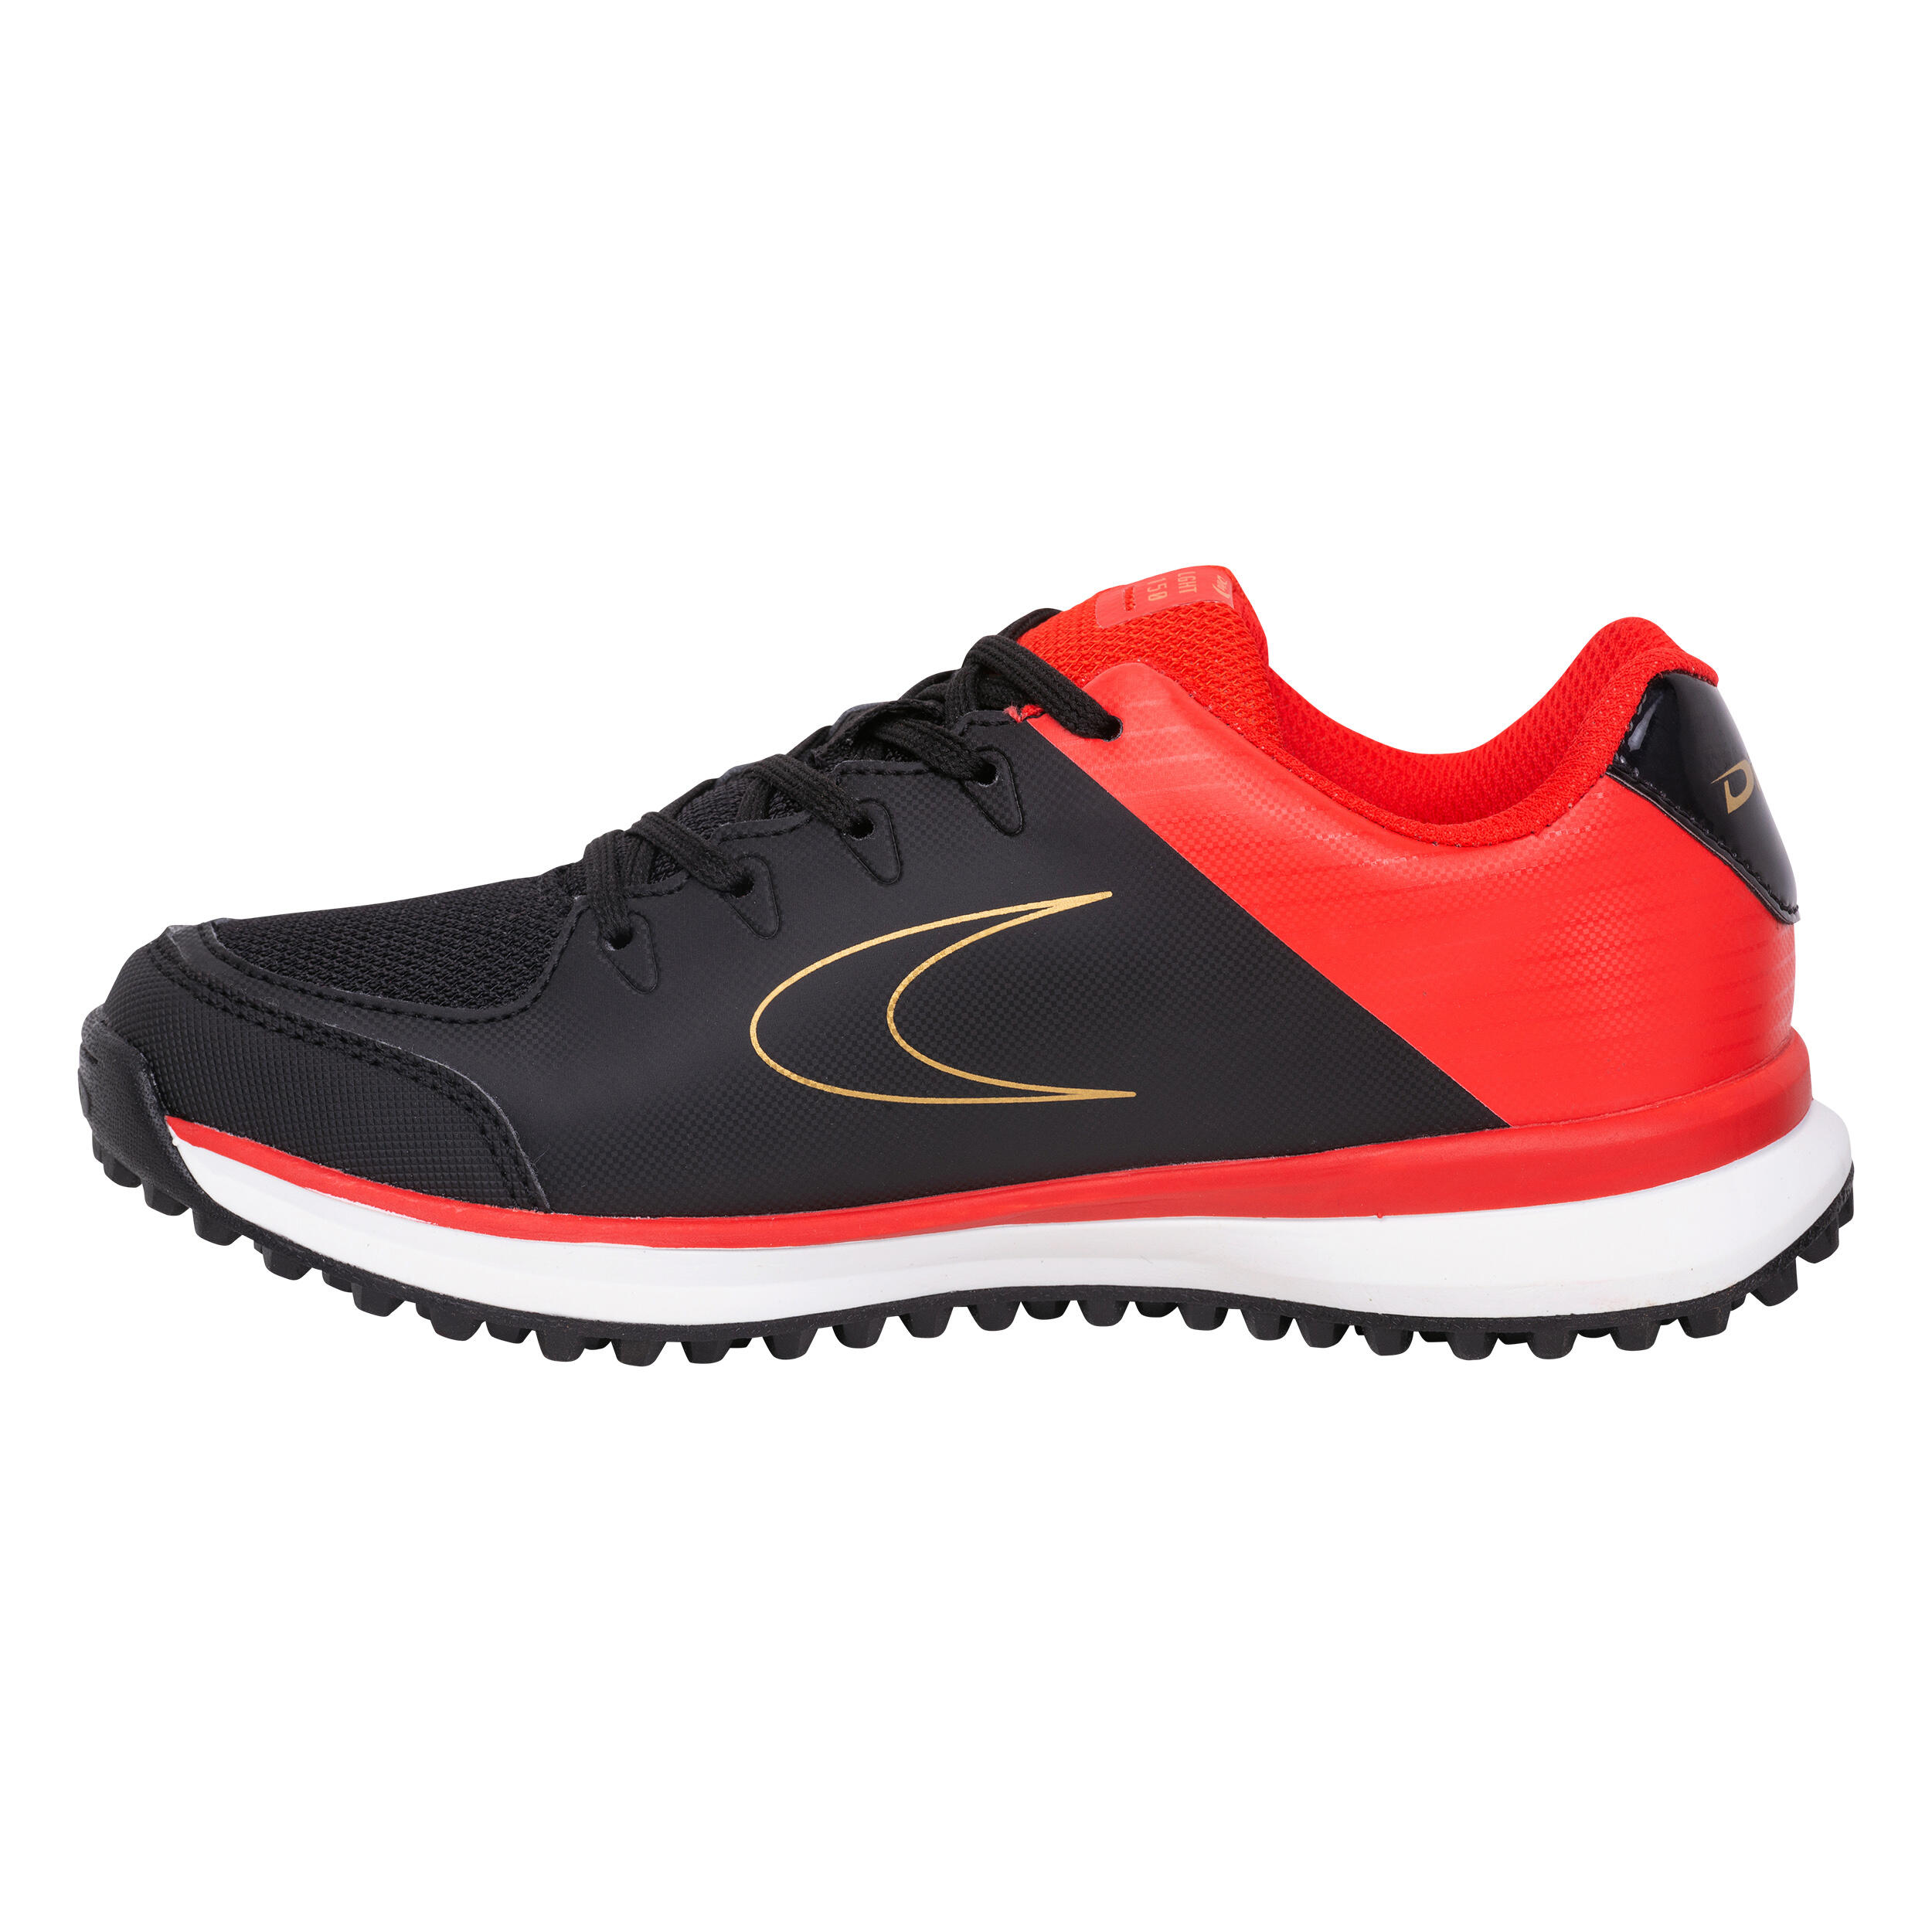 Teens' Low- to Moderate-Intensity Field Hockey Shoes LGHT 150 - Red/Black 3/7